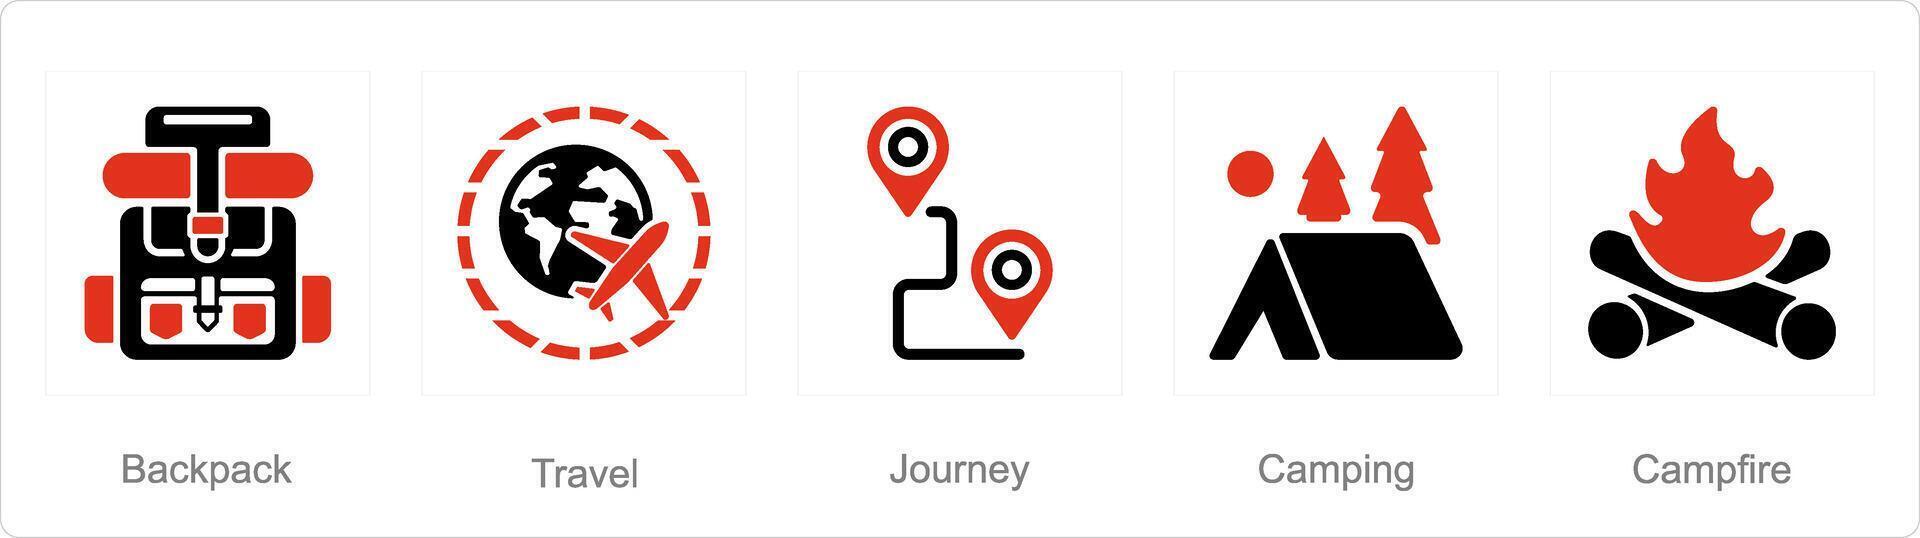 A set of 5 Adventure icons as backpack, travel, journey vector